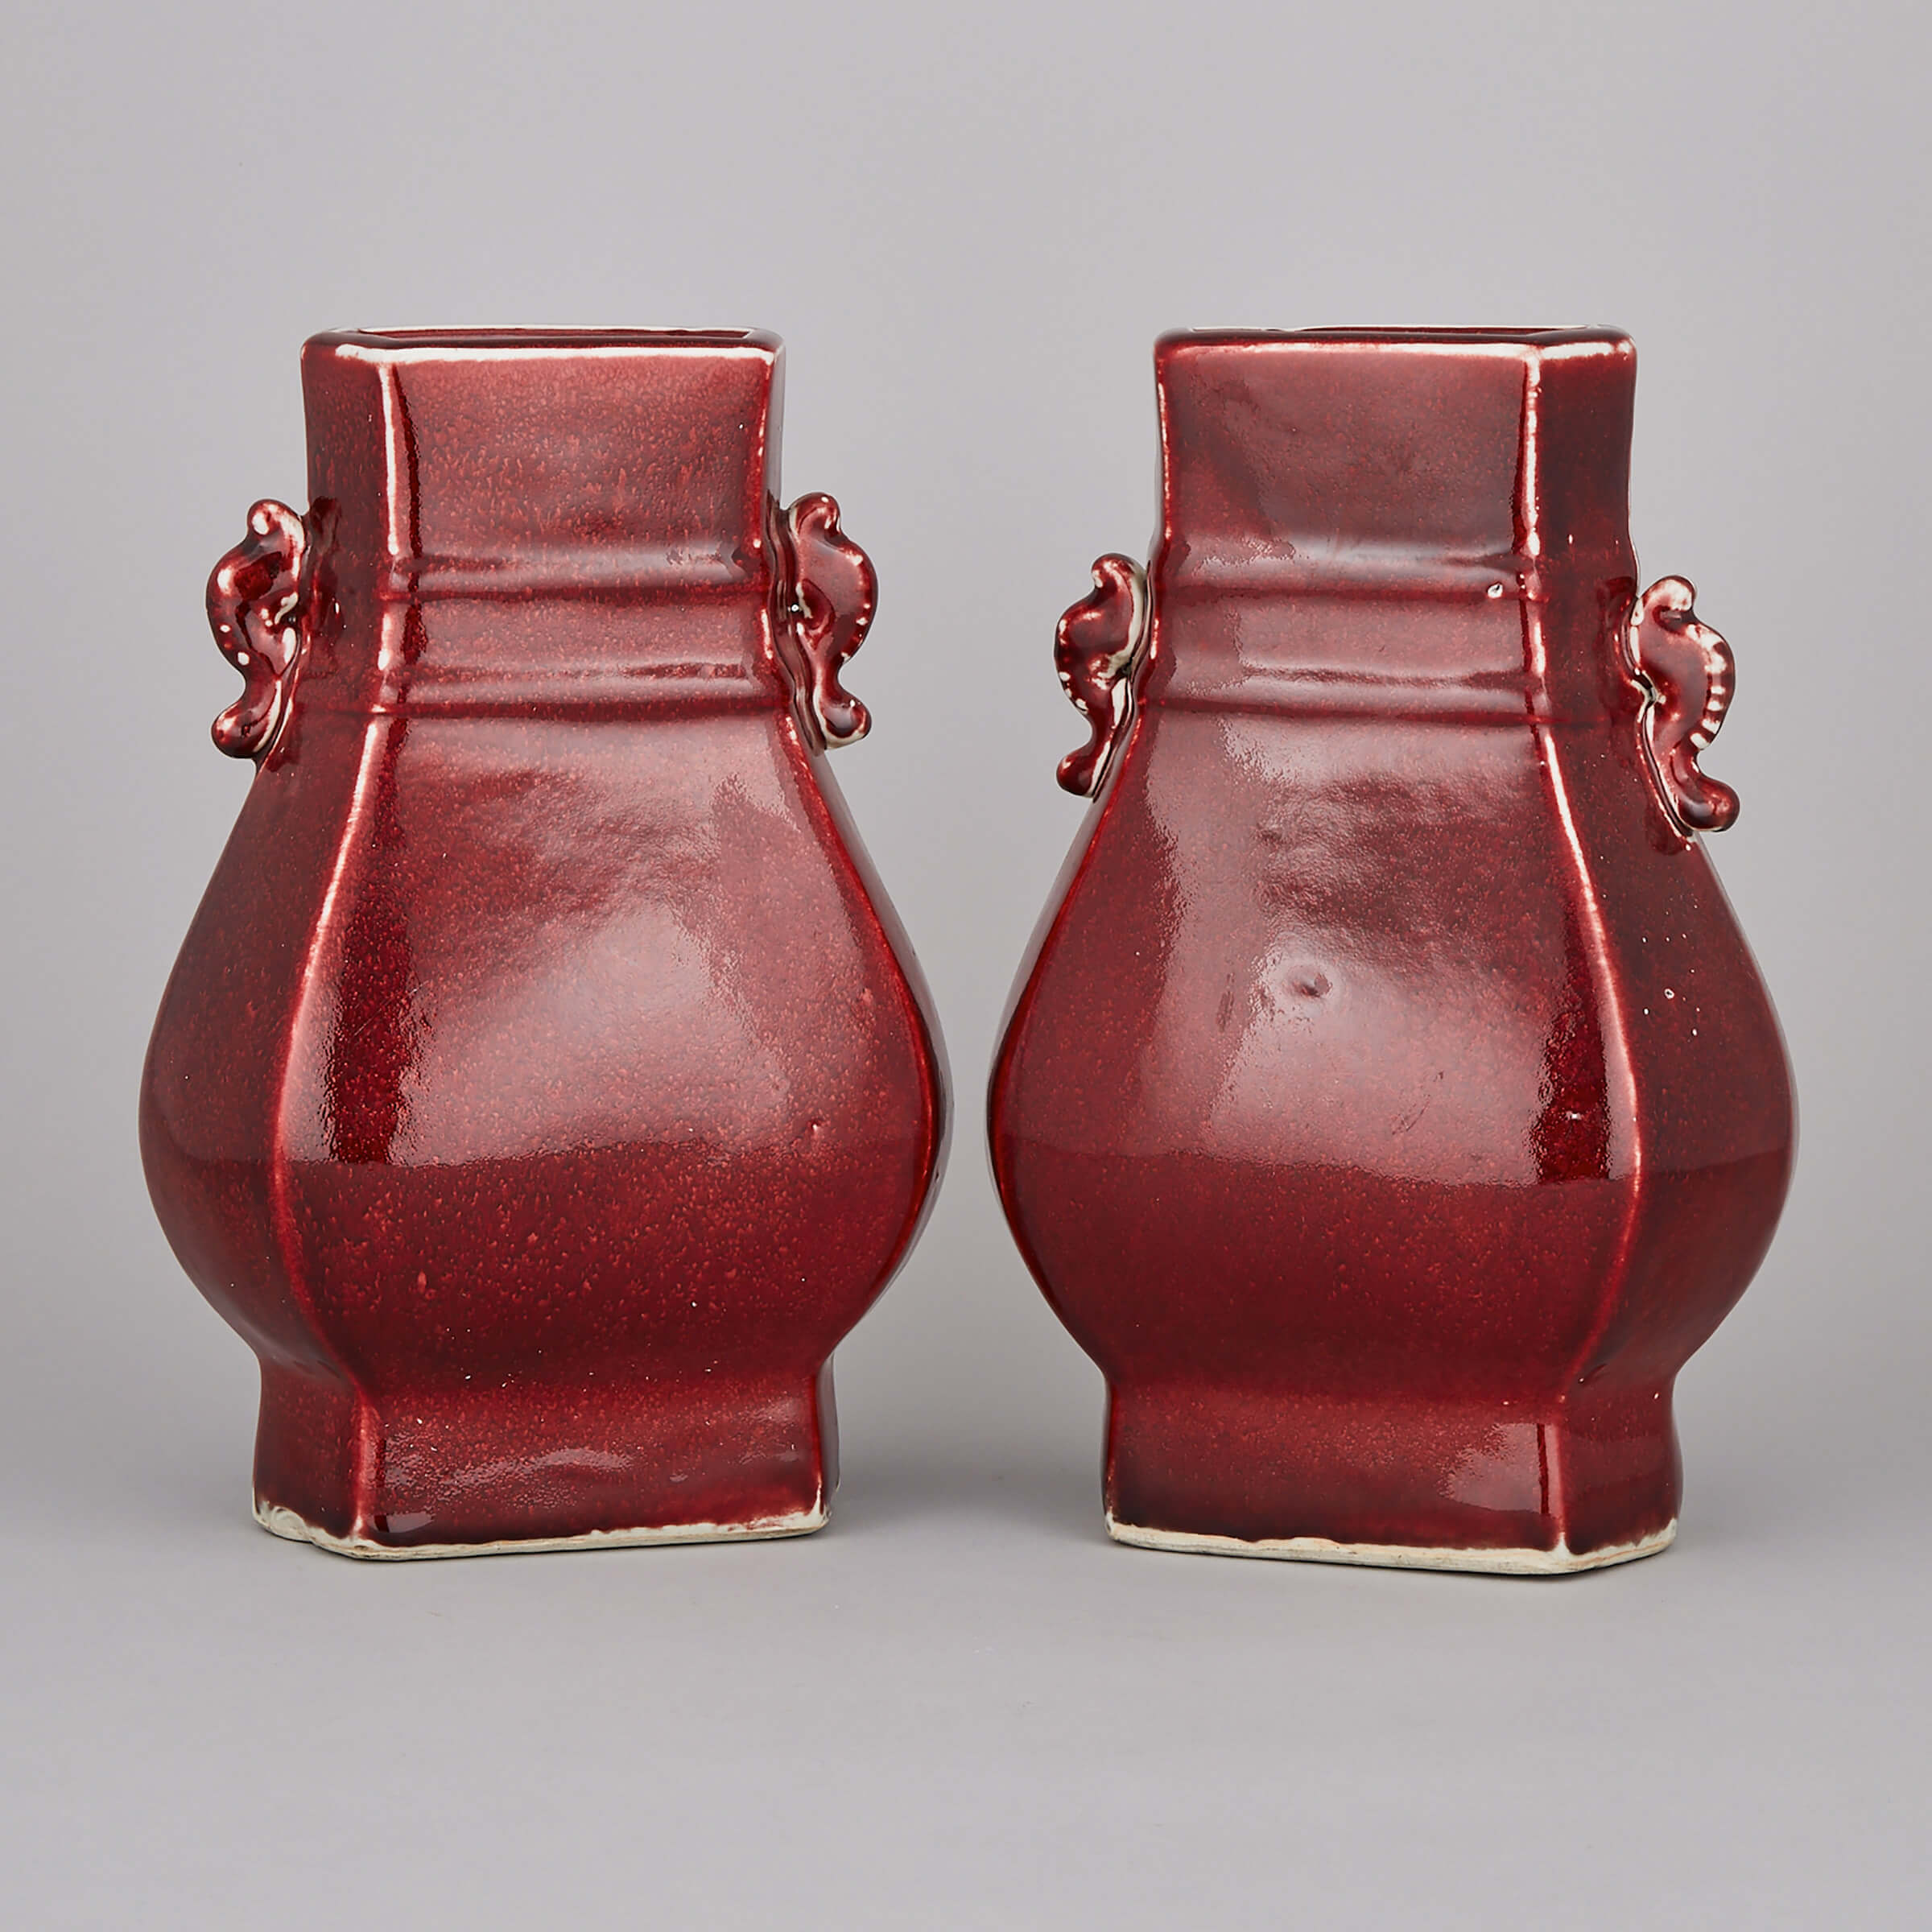 A Pair of Red Glazed Vases with Handles